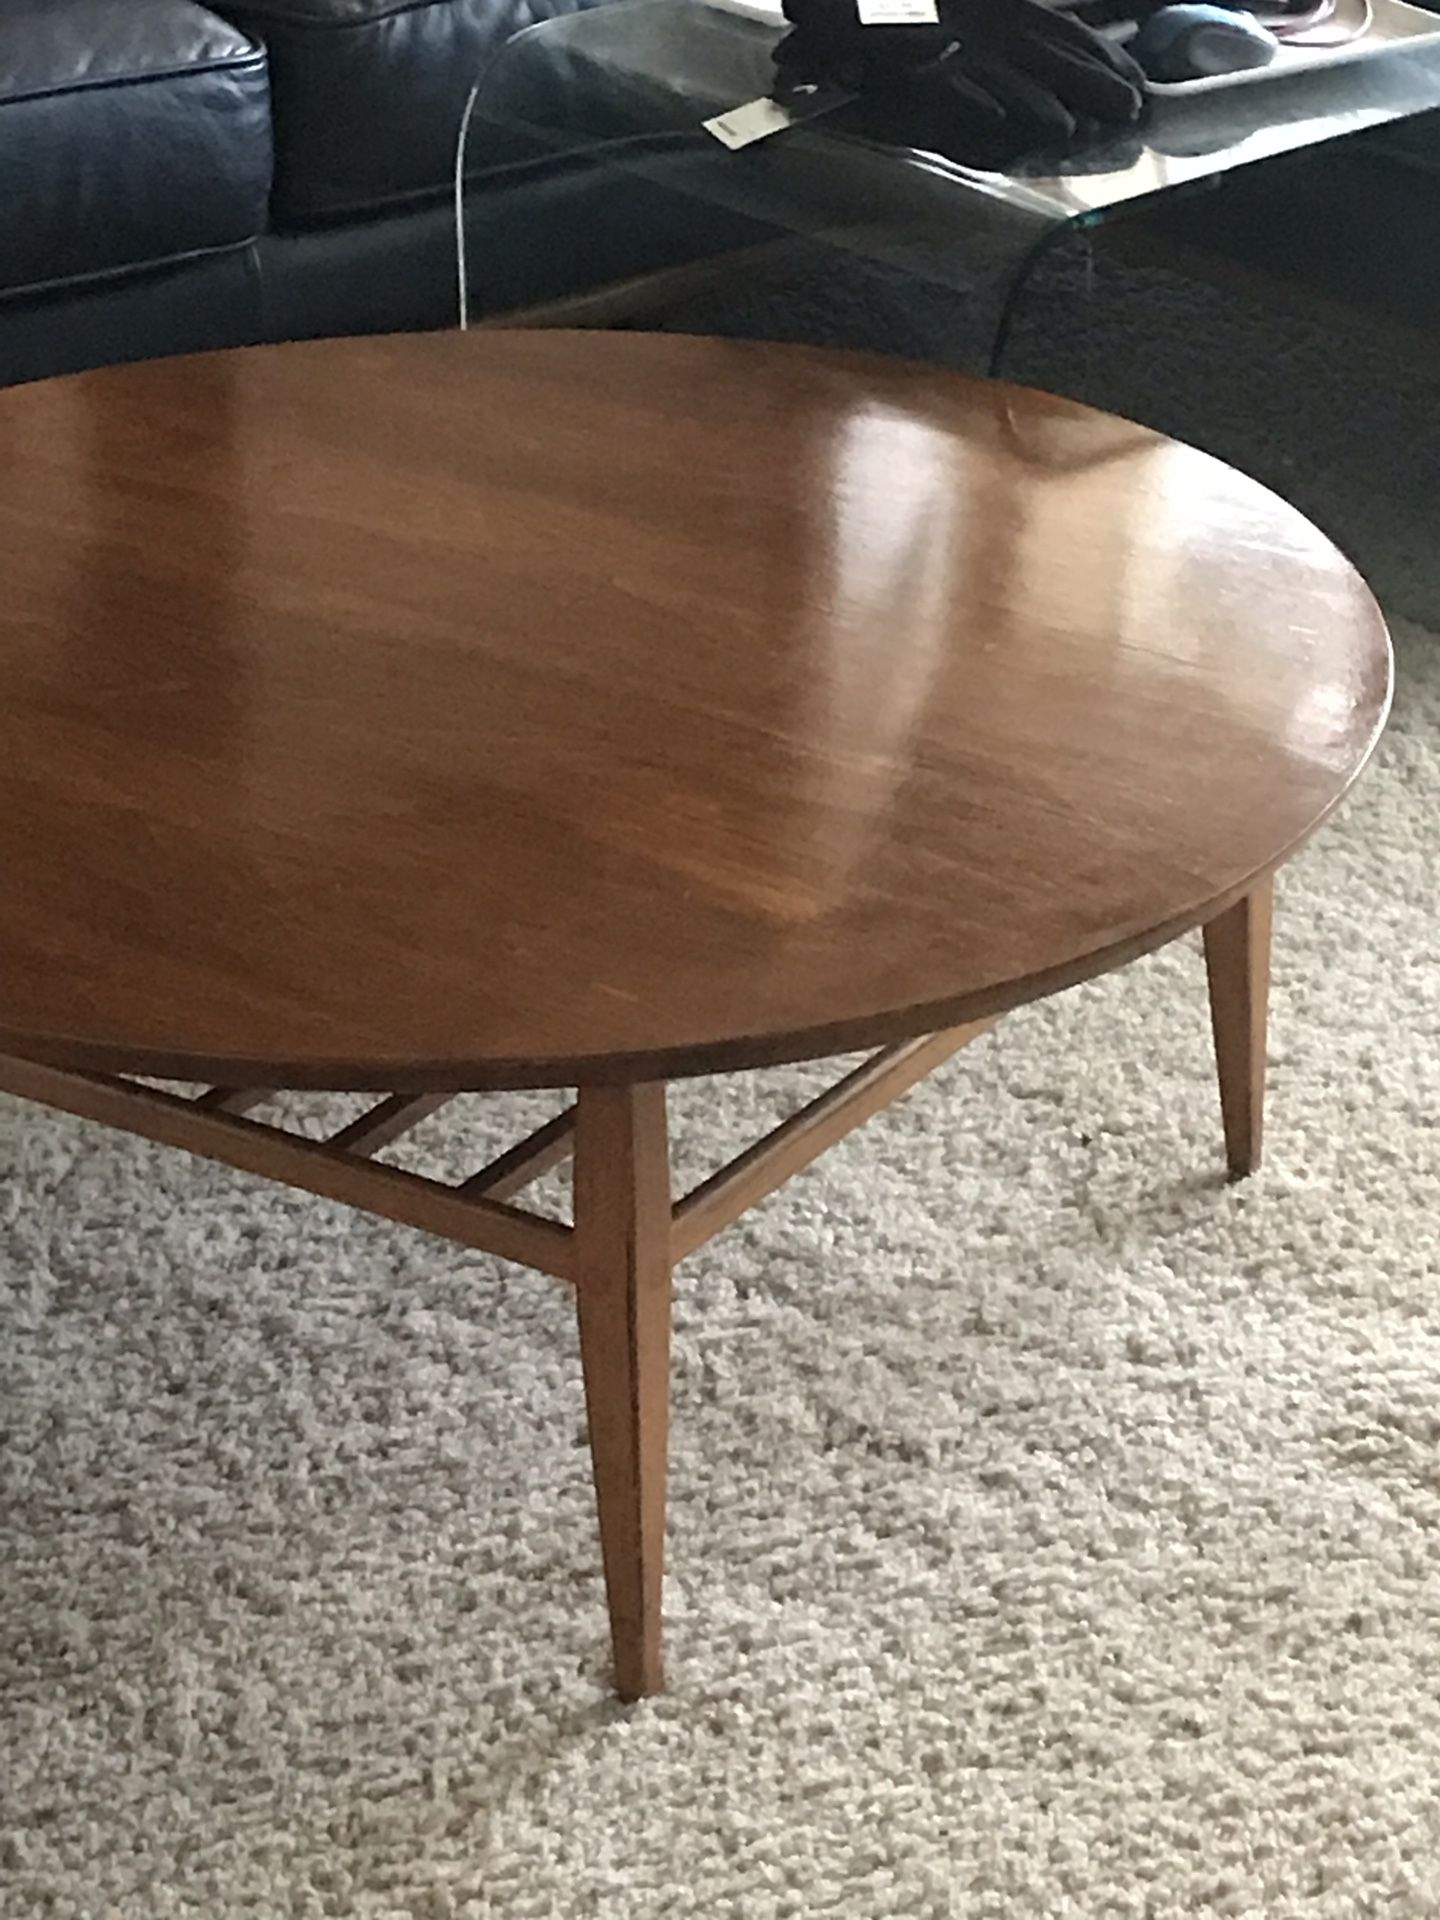 MCM coffee table 36” wide/ 14.25” high